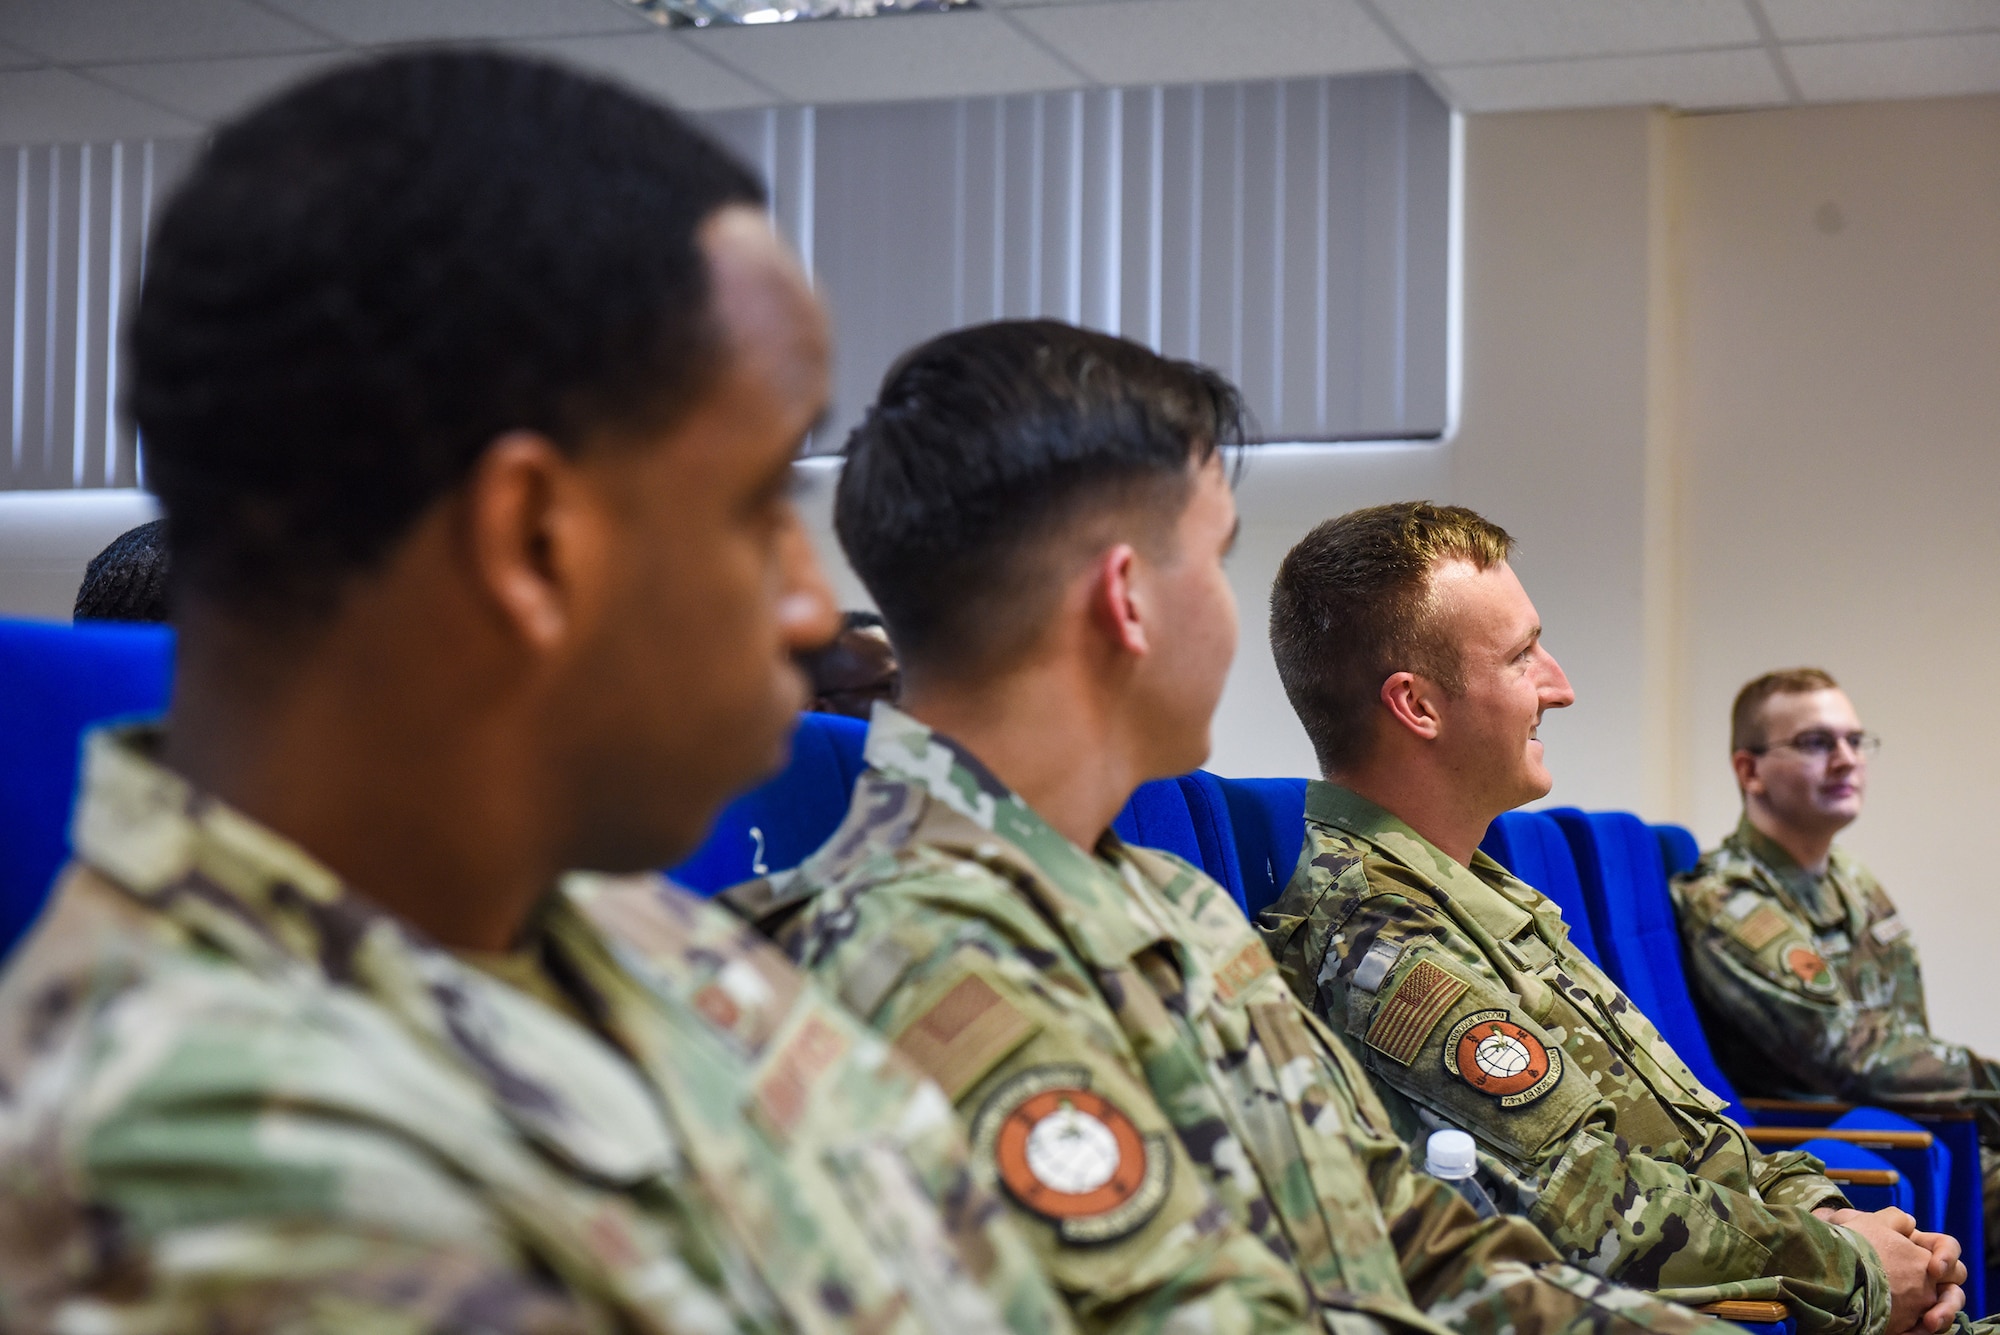 Airmen of the 39th Air Base Wing (ABW) attending Airman Leadership School (ALS) Class 22-F listen to Col. Kevin McCaskey, 39th ABW vice commander, lecture in the ALS classroom at Incirlik Air Base, Turkey, Aug. 8, 2022.